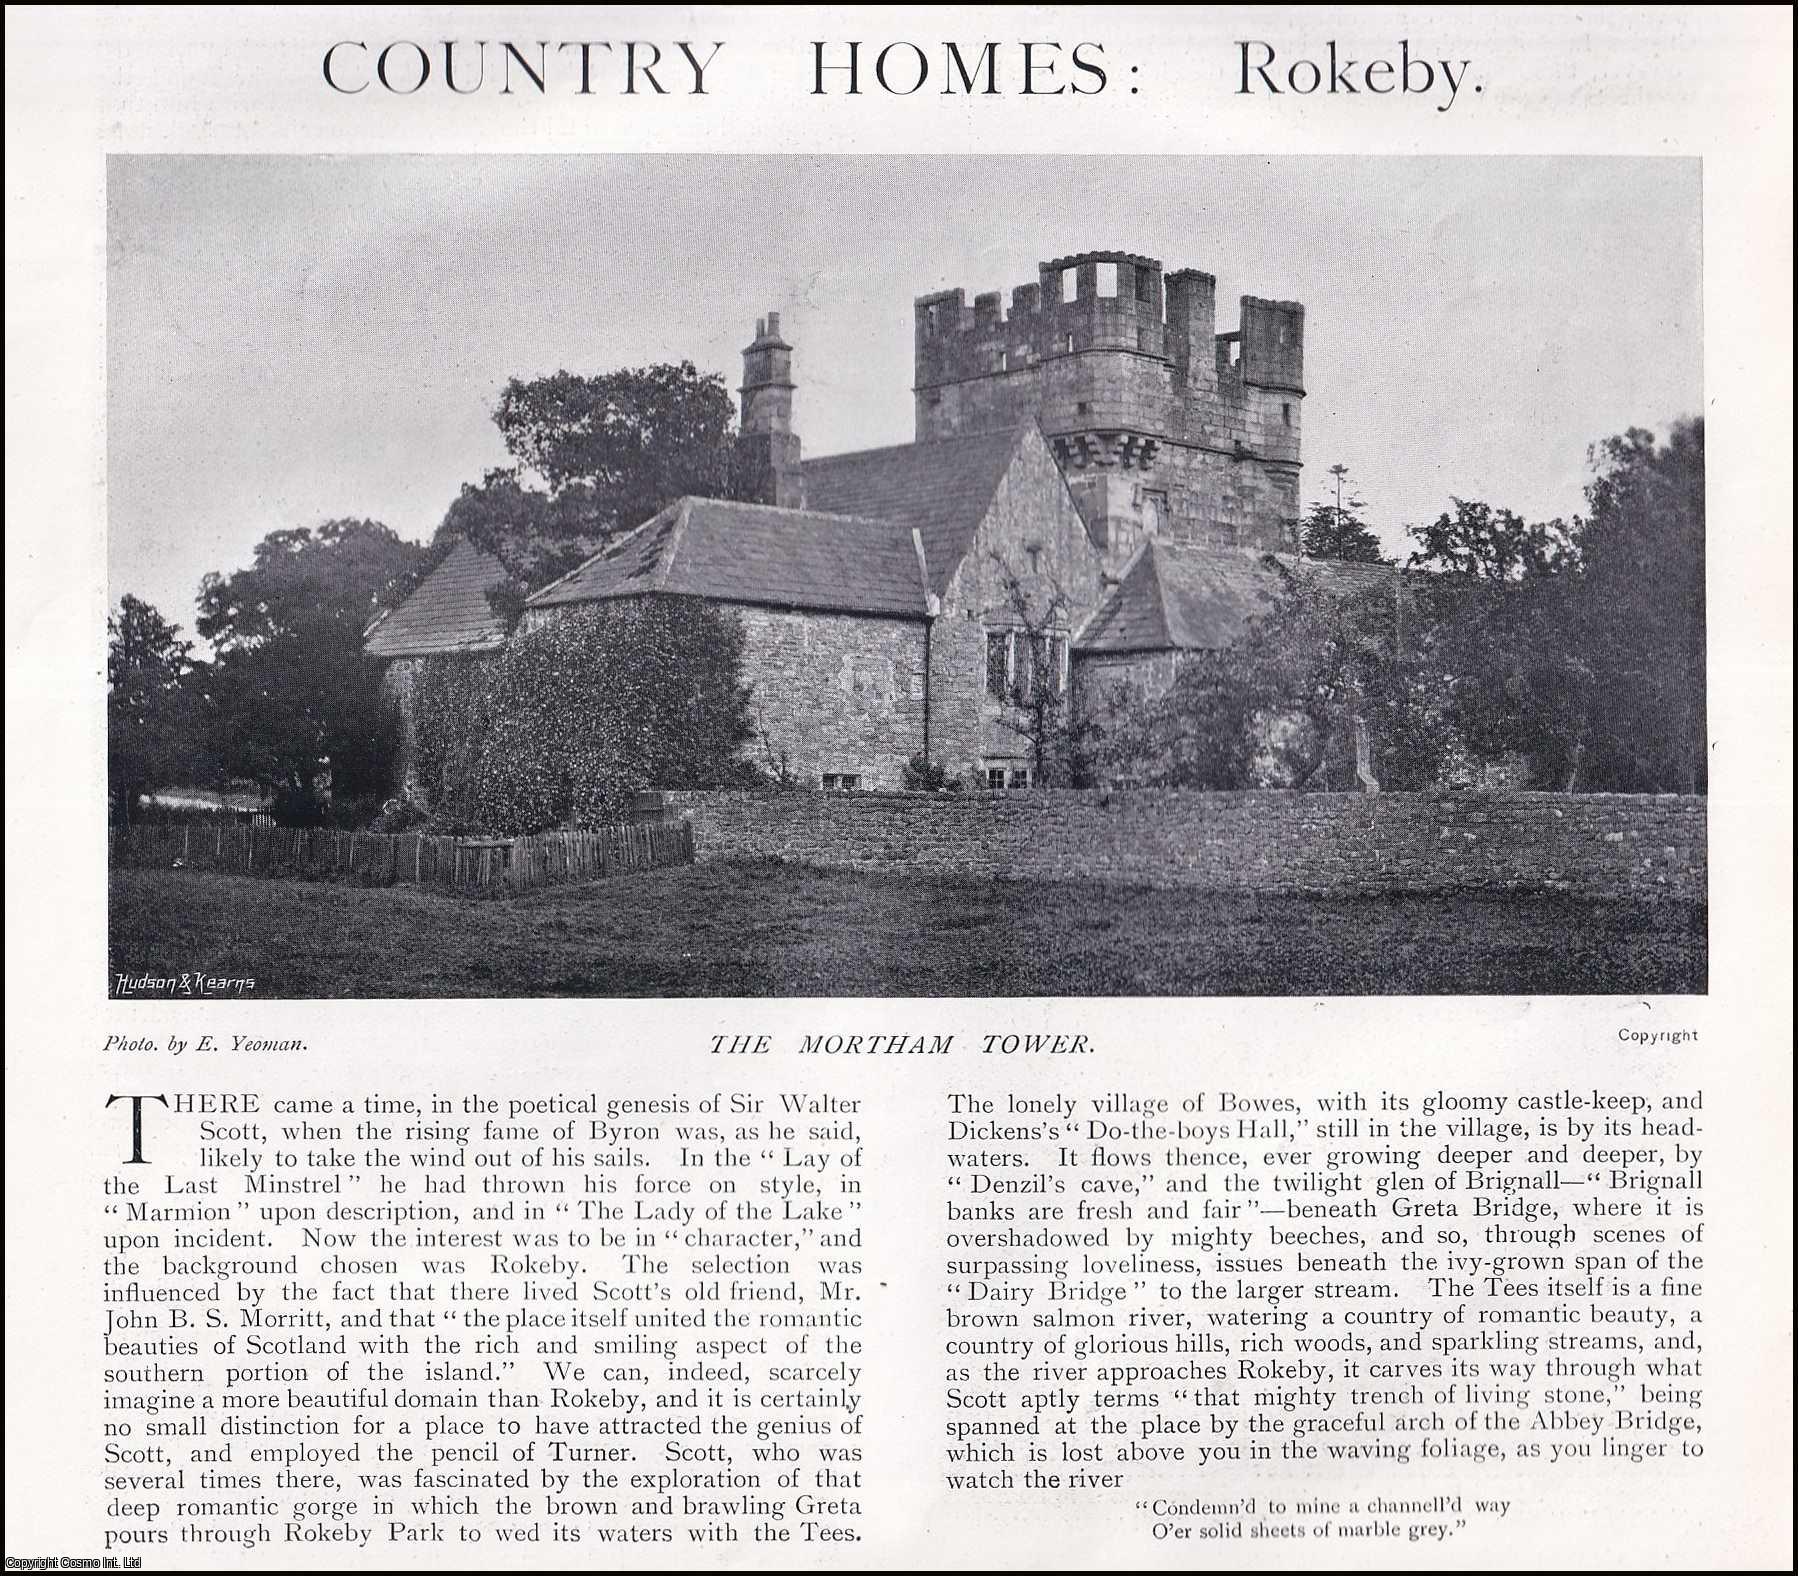 John Leyland - Rokeby. Several pictures and accompanying text, removed from an original issue of Country Life Magazine, 1897.